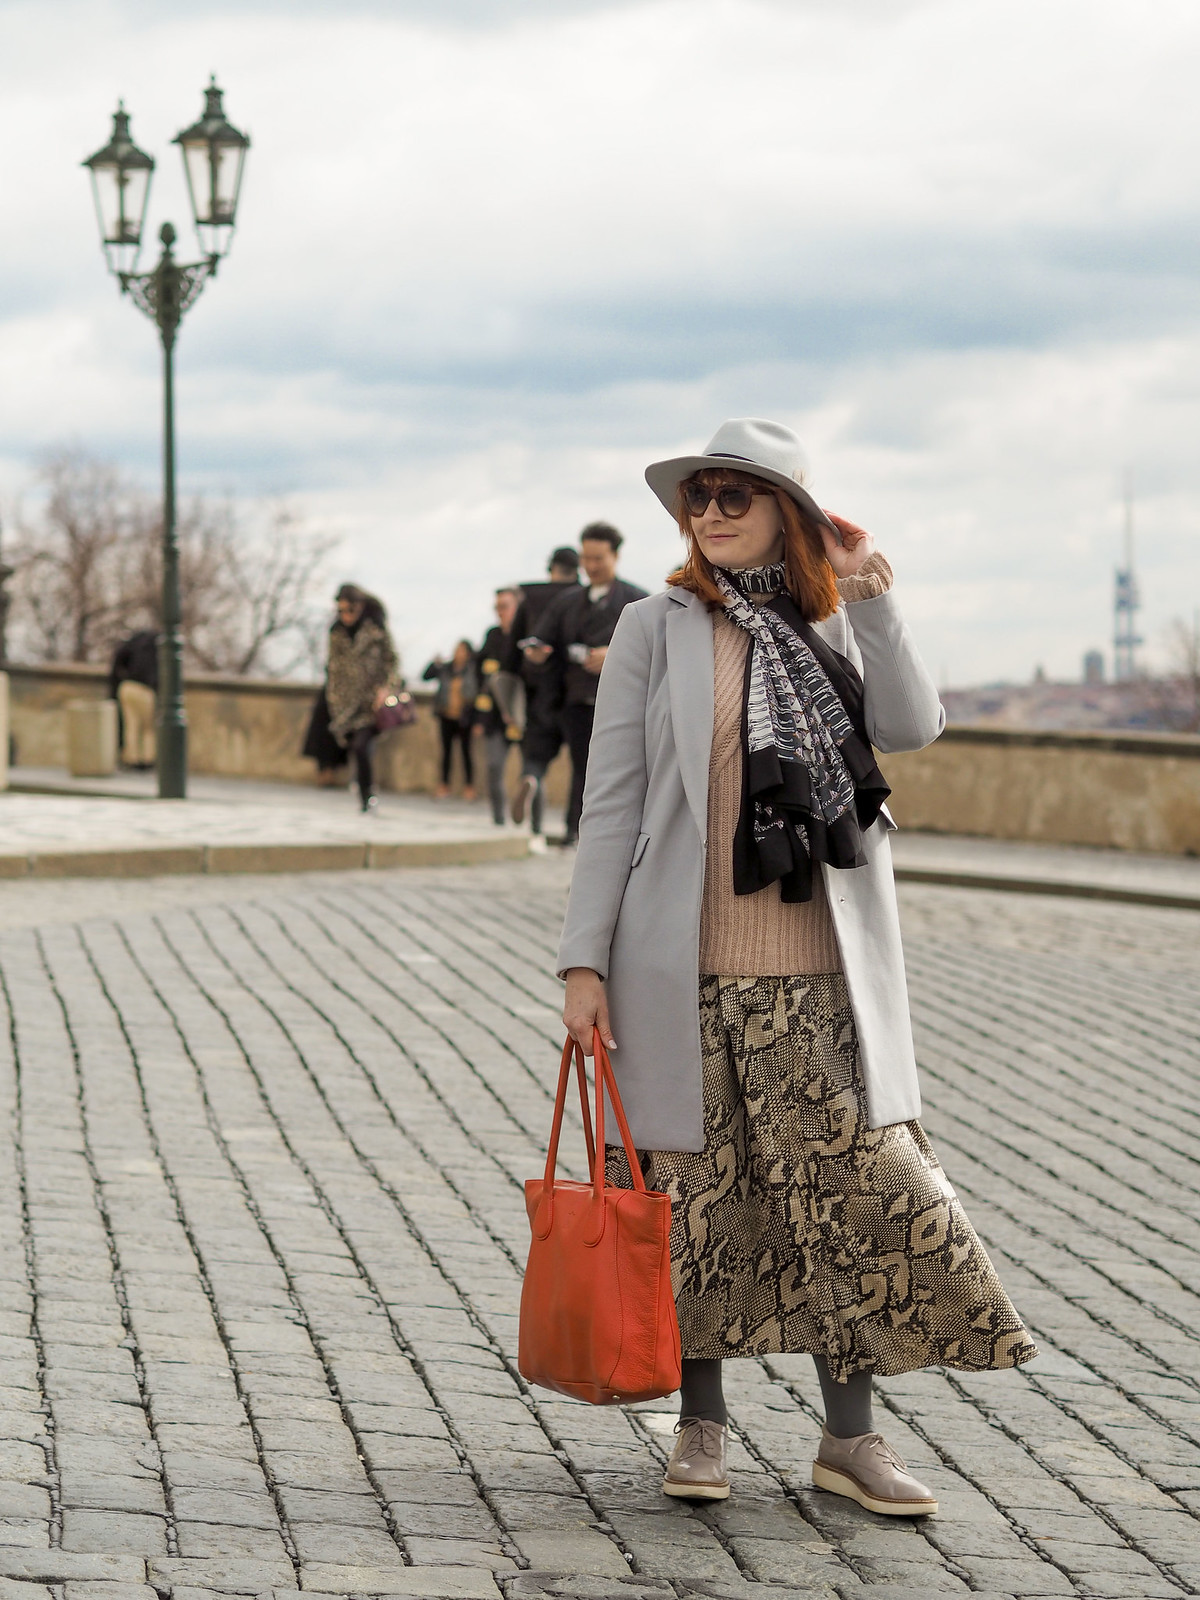 Over 40 Style: What to Wear for a European Sightseeing Break (in Prague) | Not Dressed As Lamb